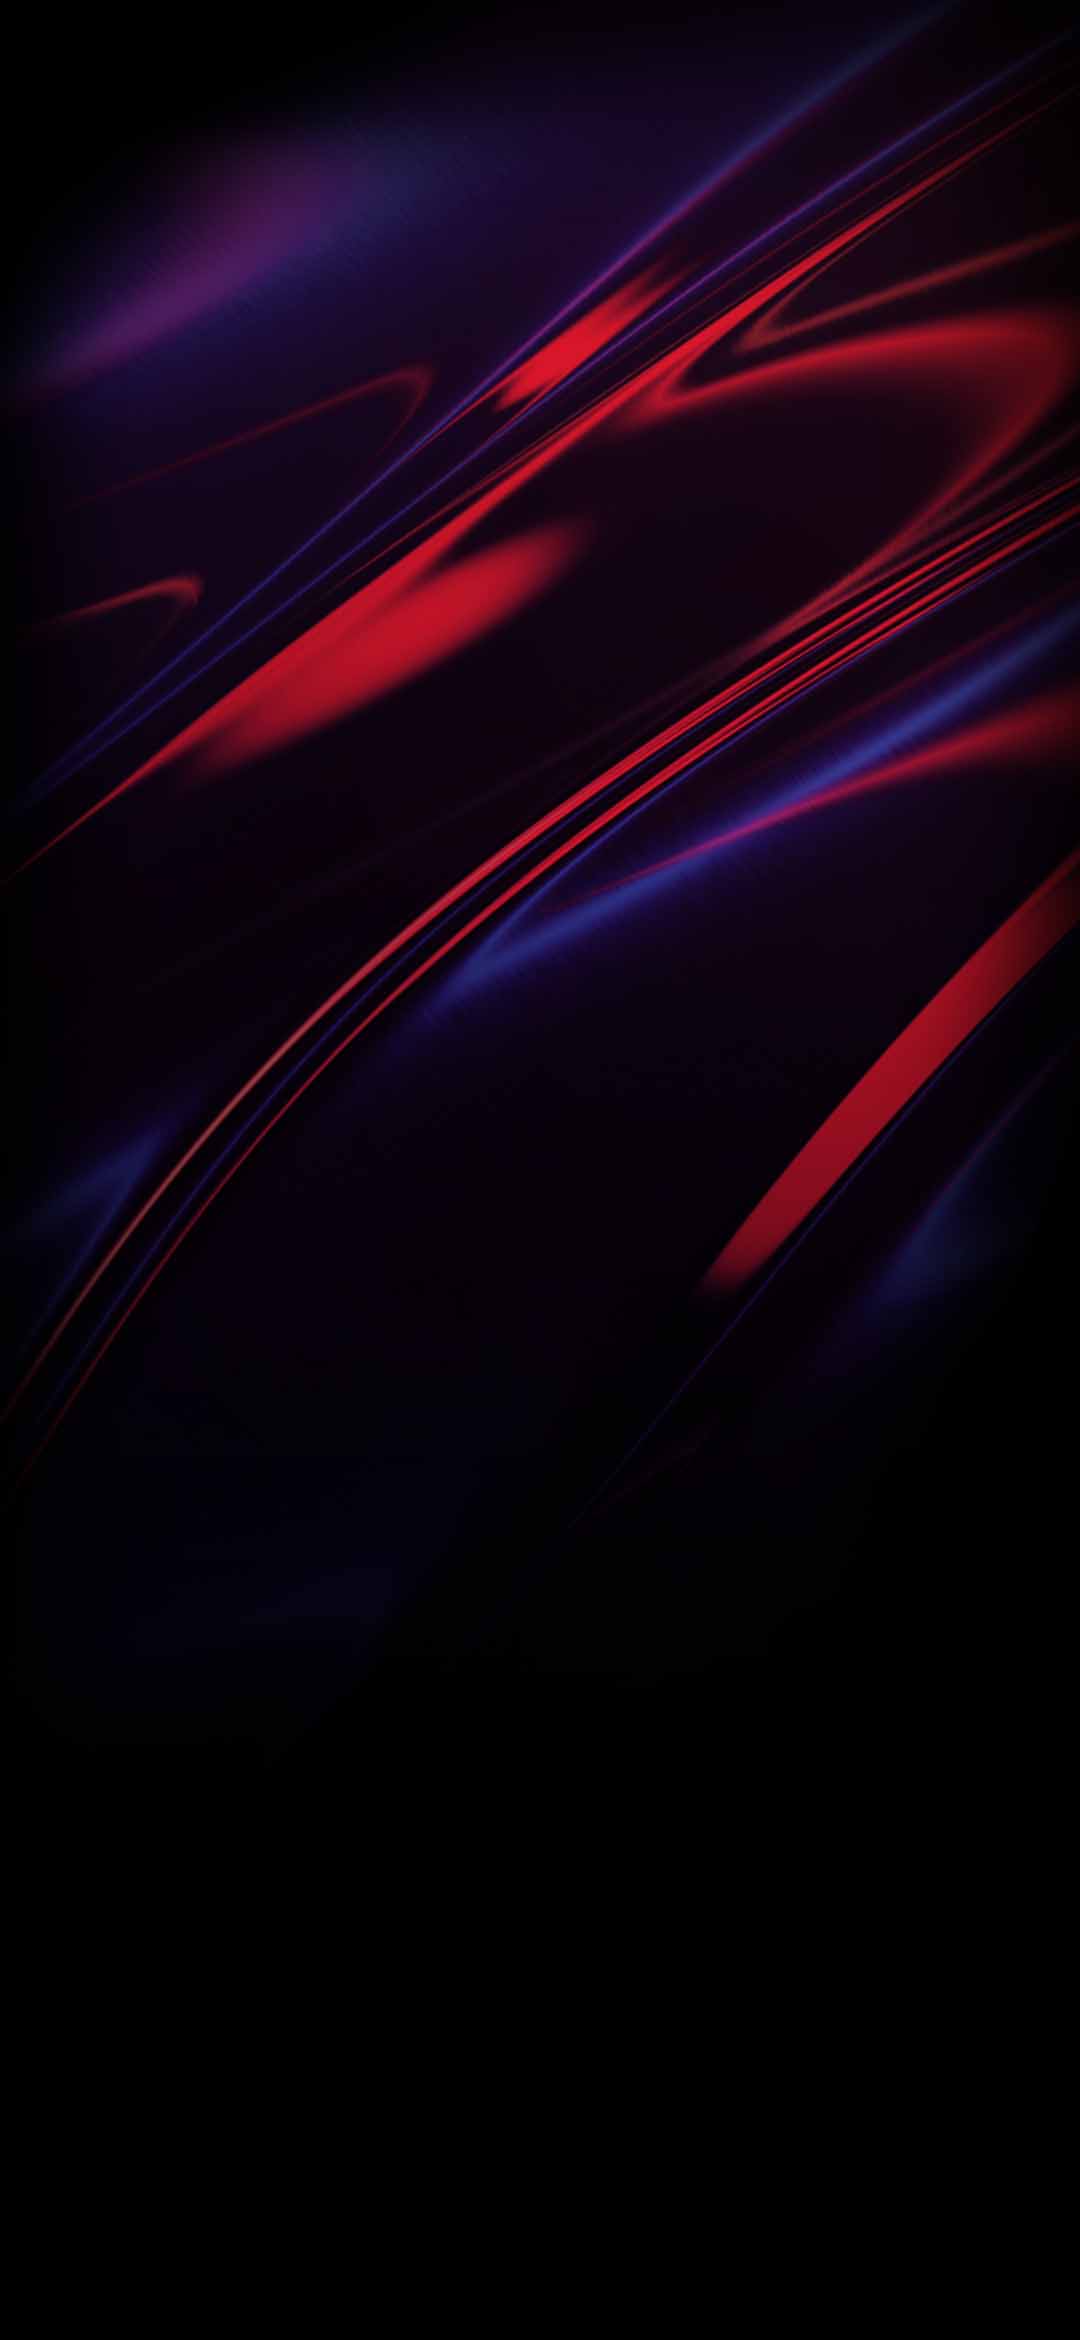 Nubia Red Magic 6s Pro Wallpapers | Live screen wallpaper, Android  wallpaper dark, Android wallpaper abstract